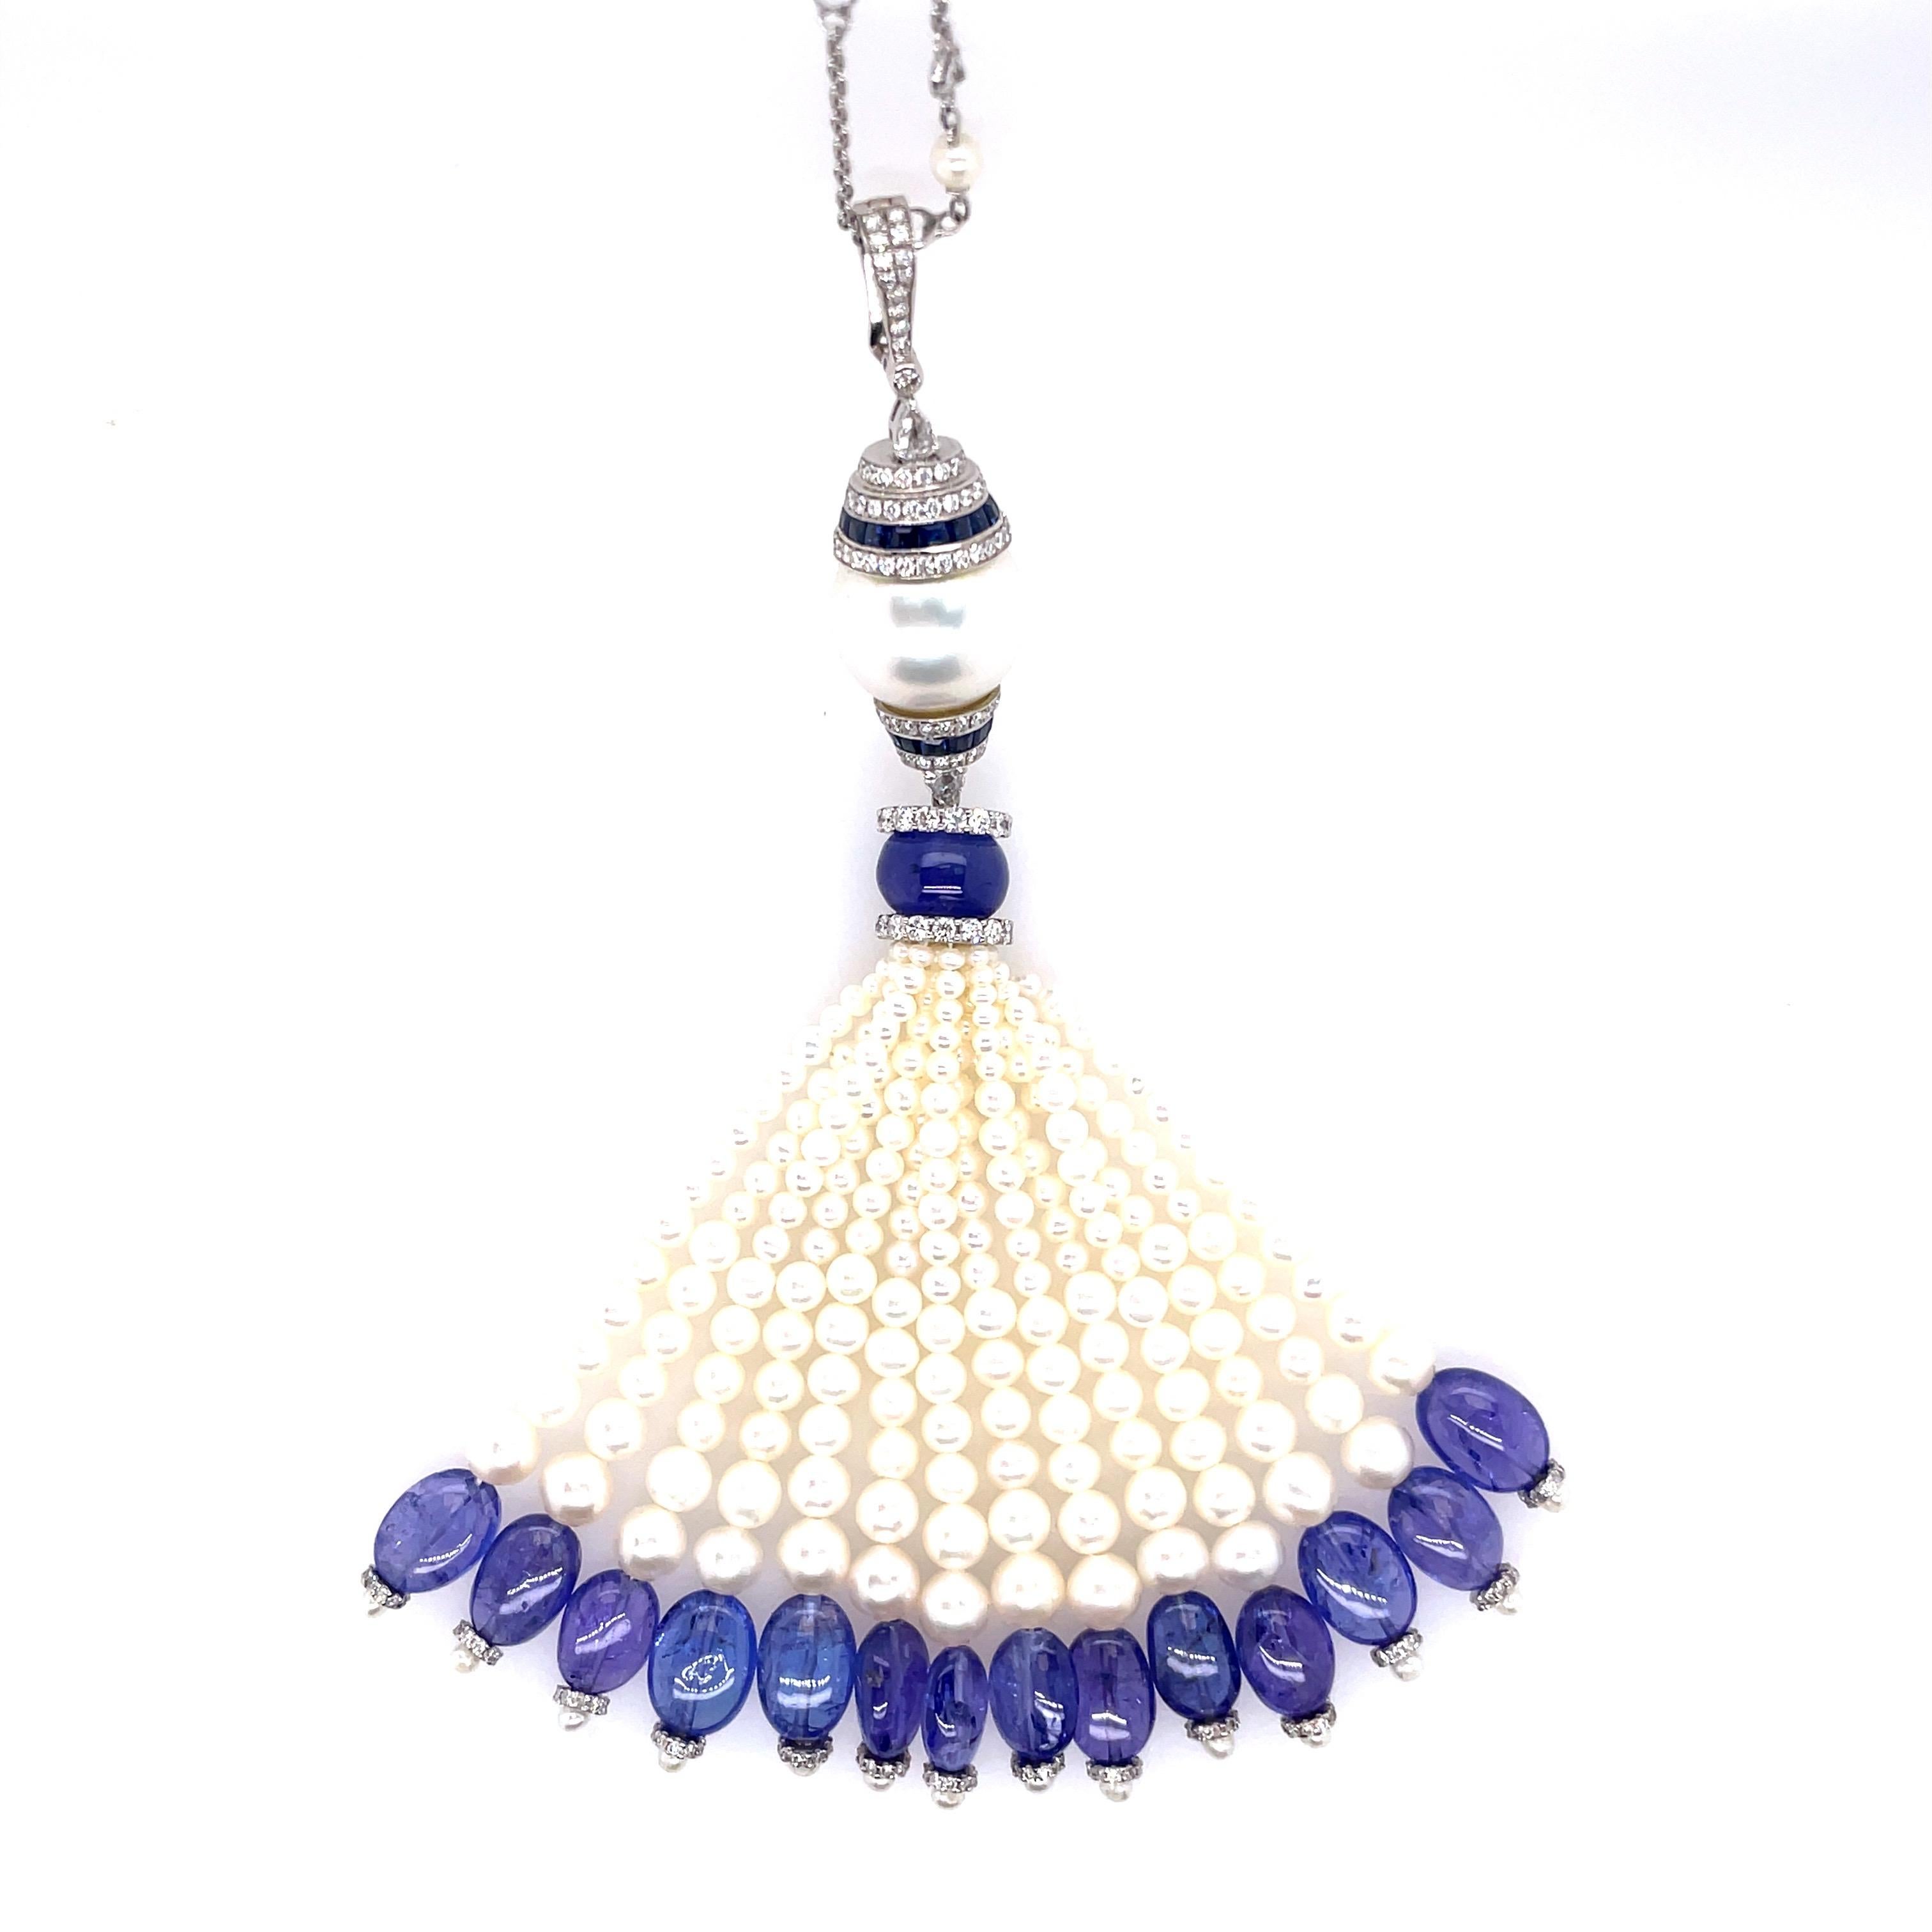 18K White Gold Pearl and Tanzanite Beaded Tassel

Masterpiece beyond compare; 18k White Gold Pearl and Tanzanite Beaded Tassel, an unparalleled fusion of enduring elegance and nature's splendor.

At the pinnacle, the cap sparkles with diamonds and